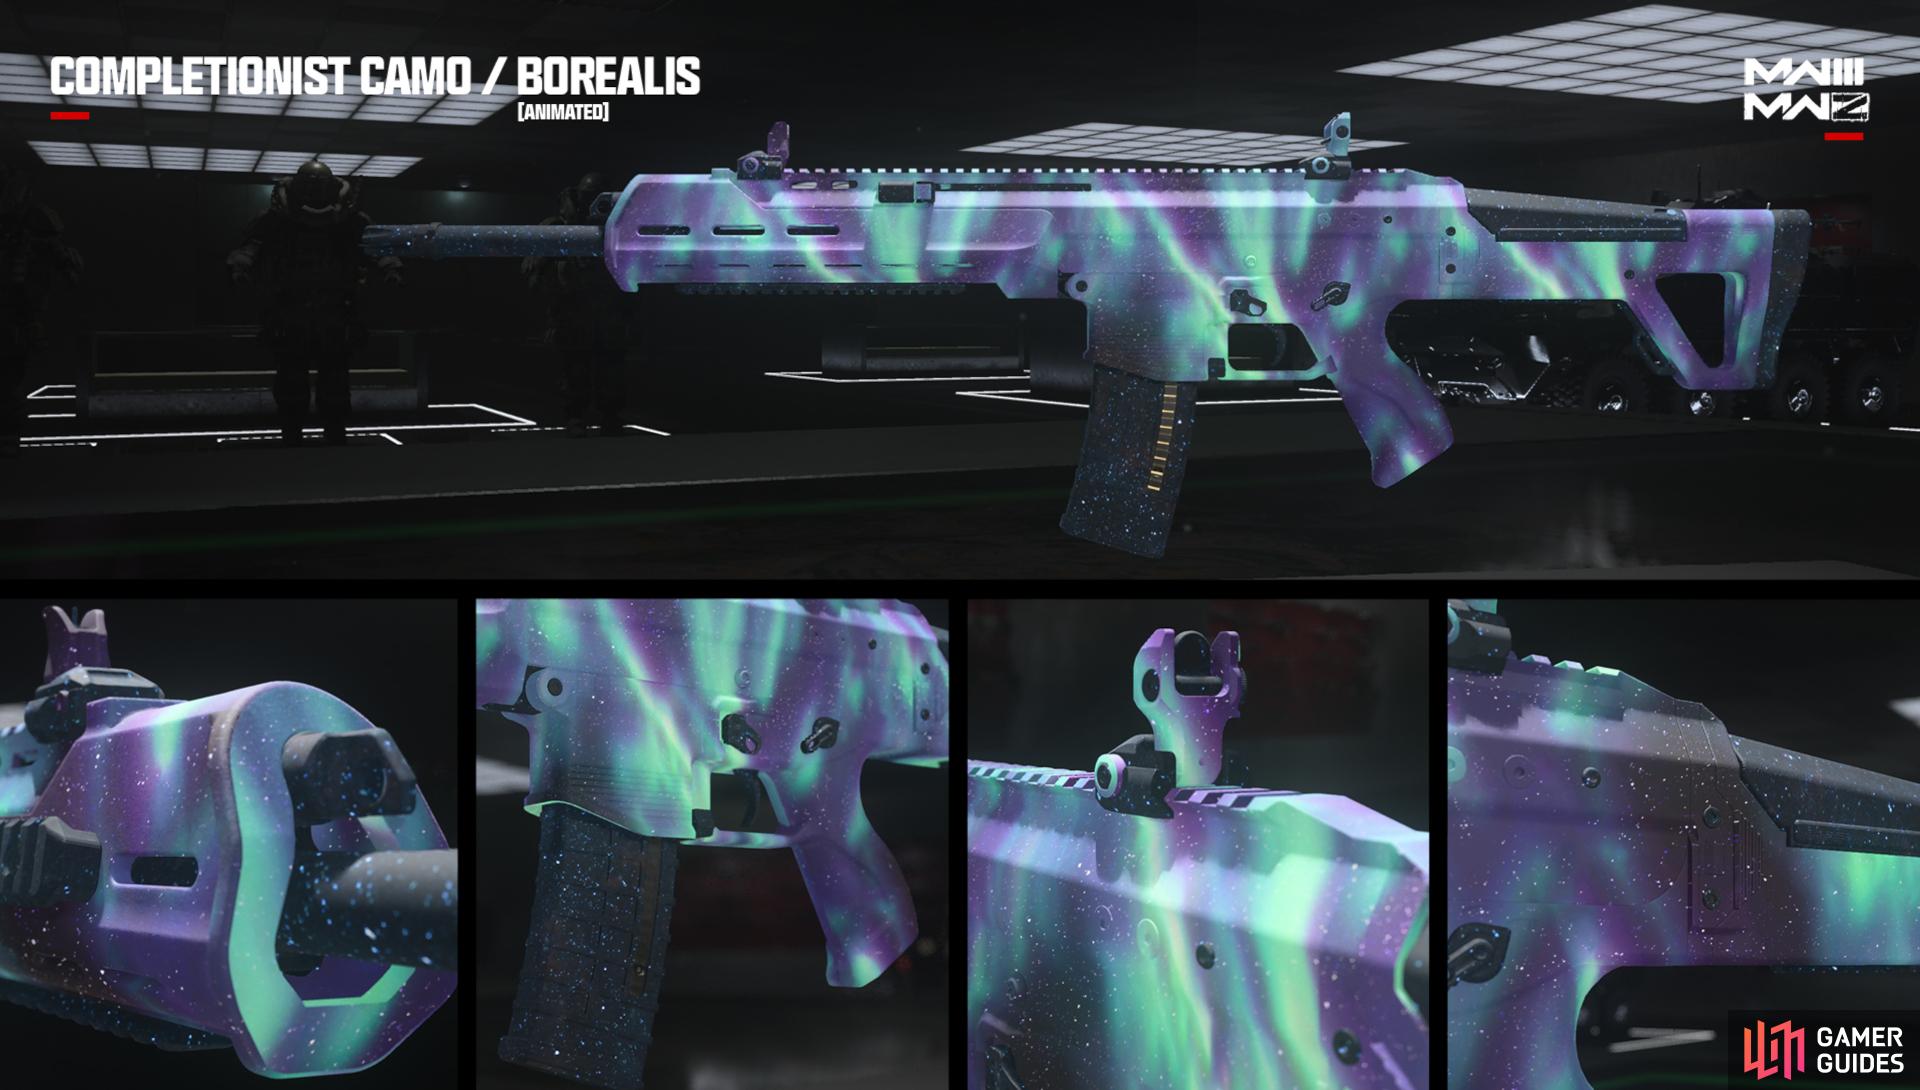 Borealis is the final goal for MW2 weapons in the Zombies mode. Image via Activision.